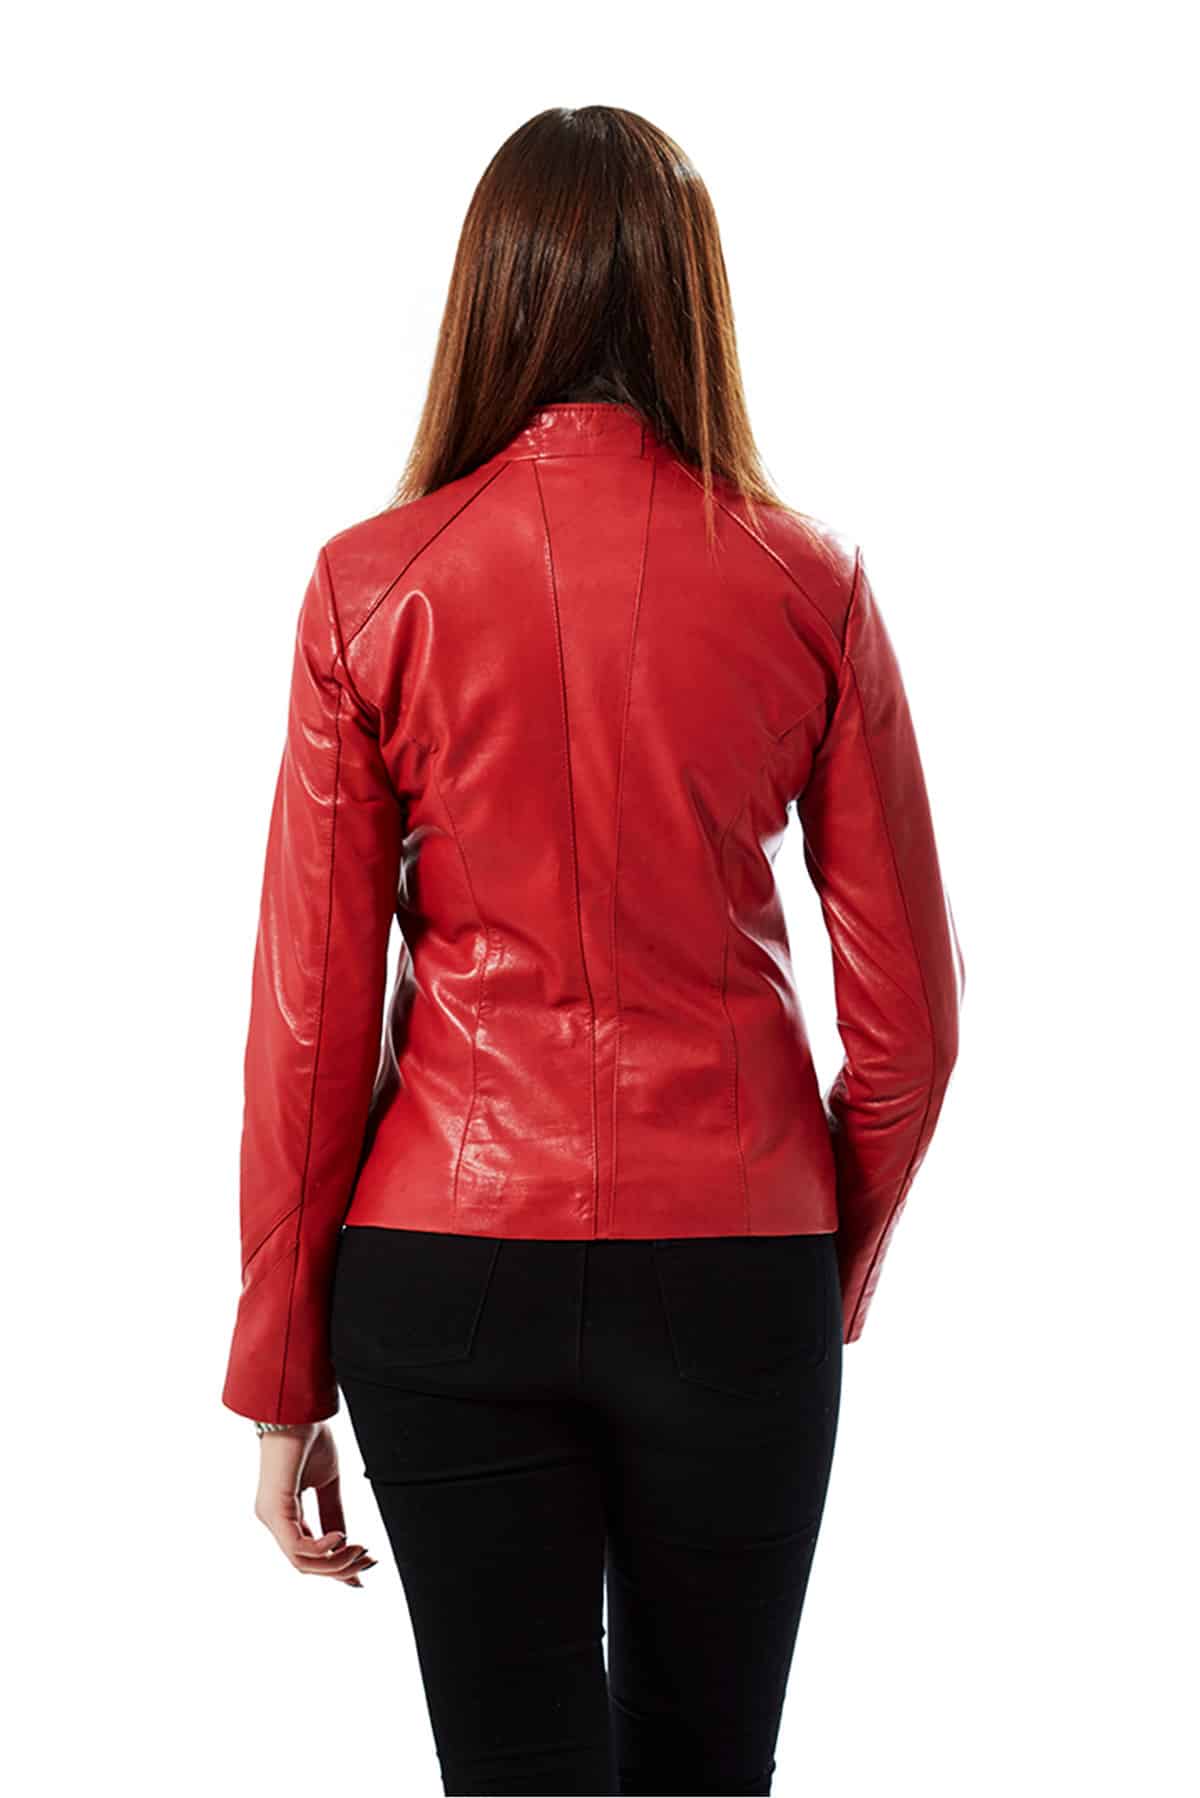 echo-red-leather-jacket